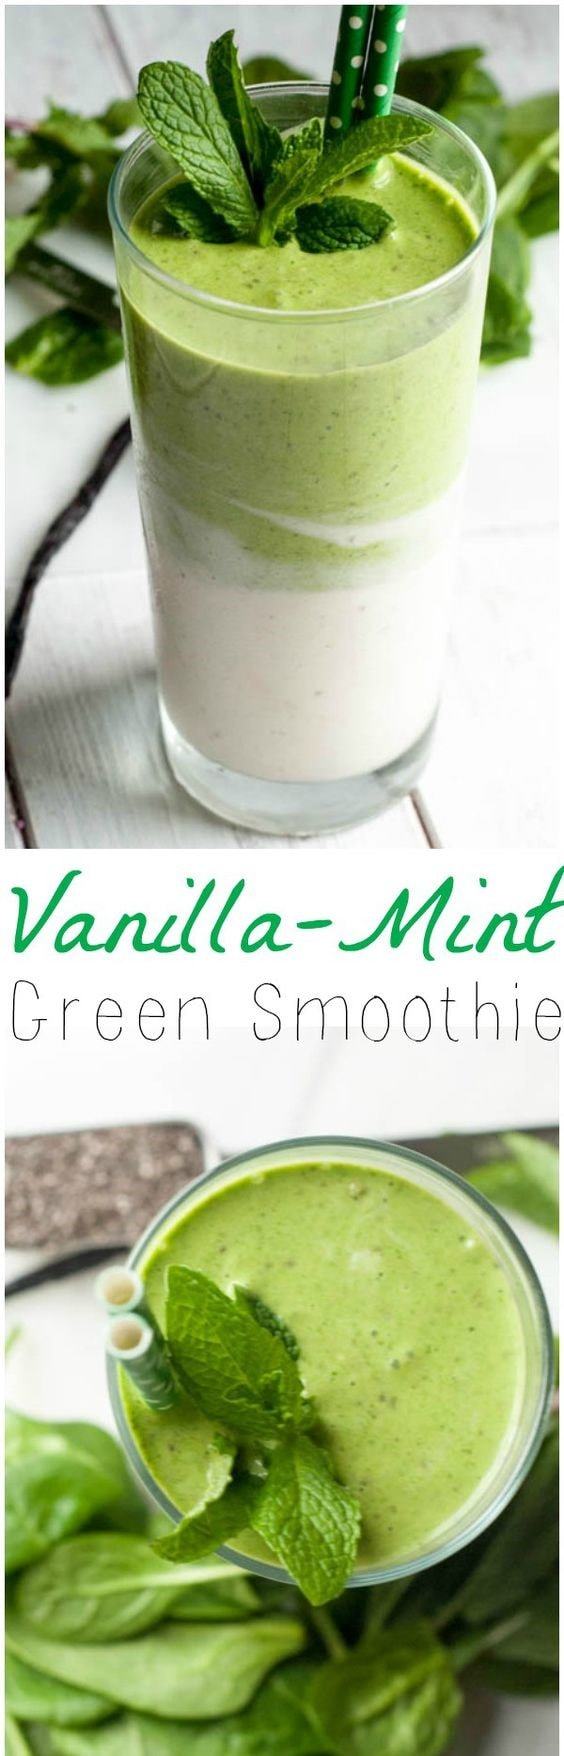 Click here to discover the best suggestions for delicious green smoothies for beginners. | simple green smoothies | green smoothie recipes for beginners | green smoothie ingredients | green smoothie benefits #healthyrecipes #healthymeals #nutrition #nobake #wellness #healthier #keepingfit #fitnessgoals #mealprep